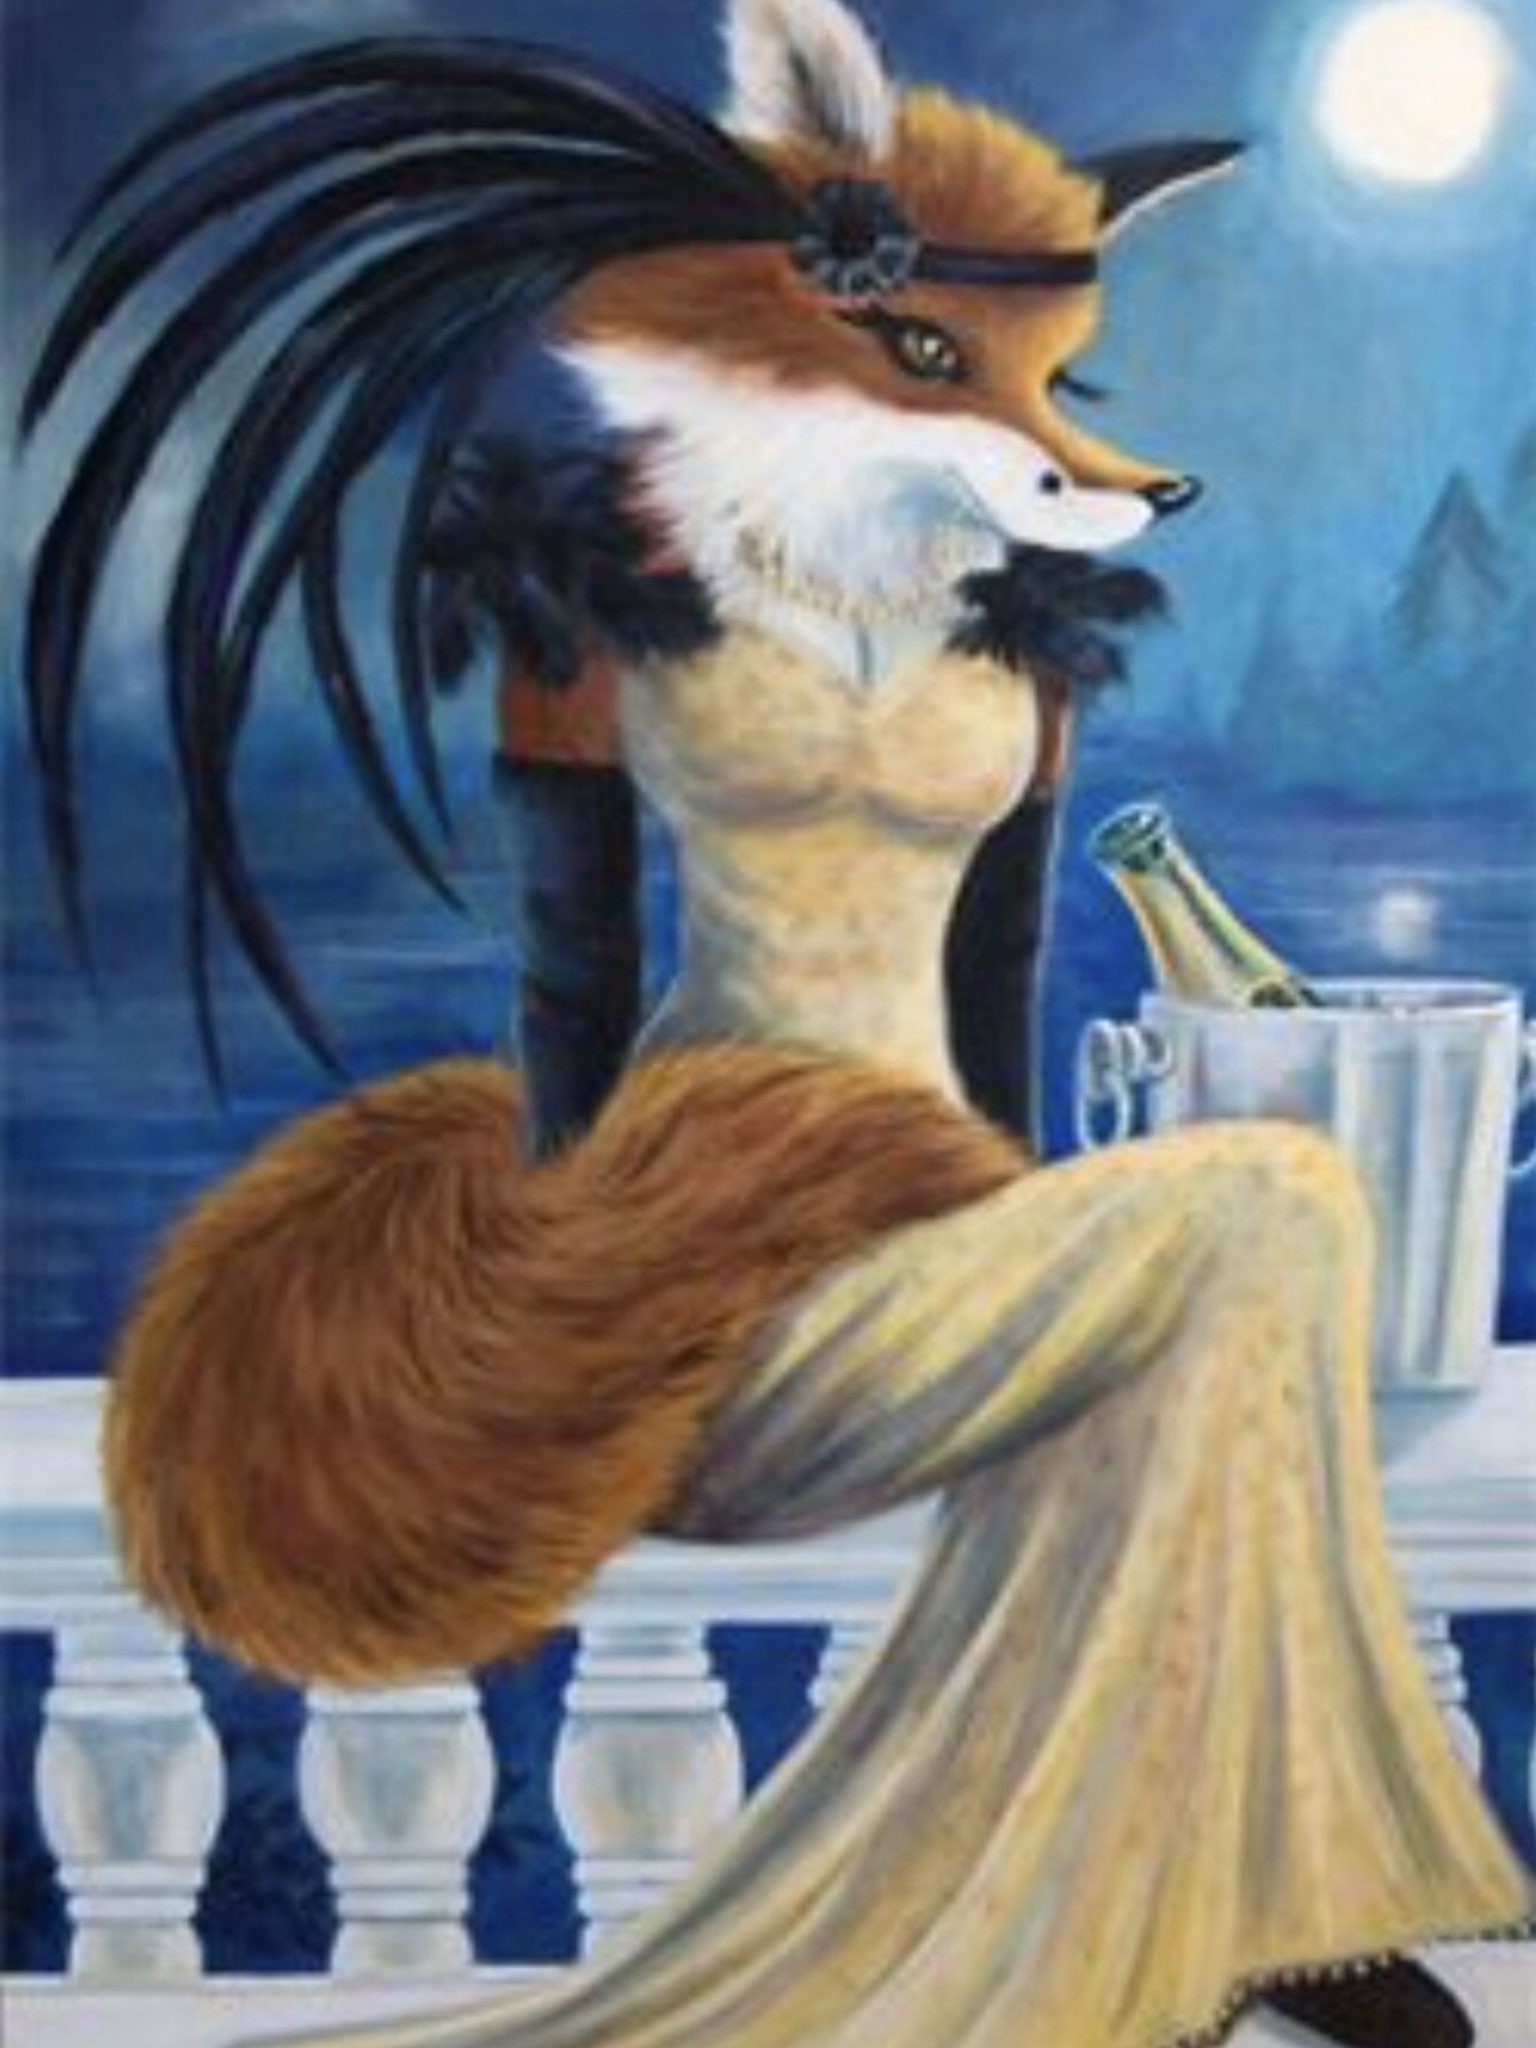 Woman in a Fox Mask Canvas Wall Art by Foxy & Paper